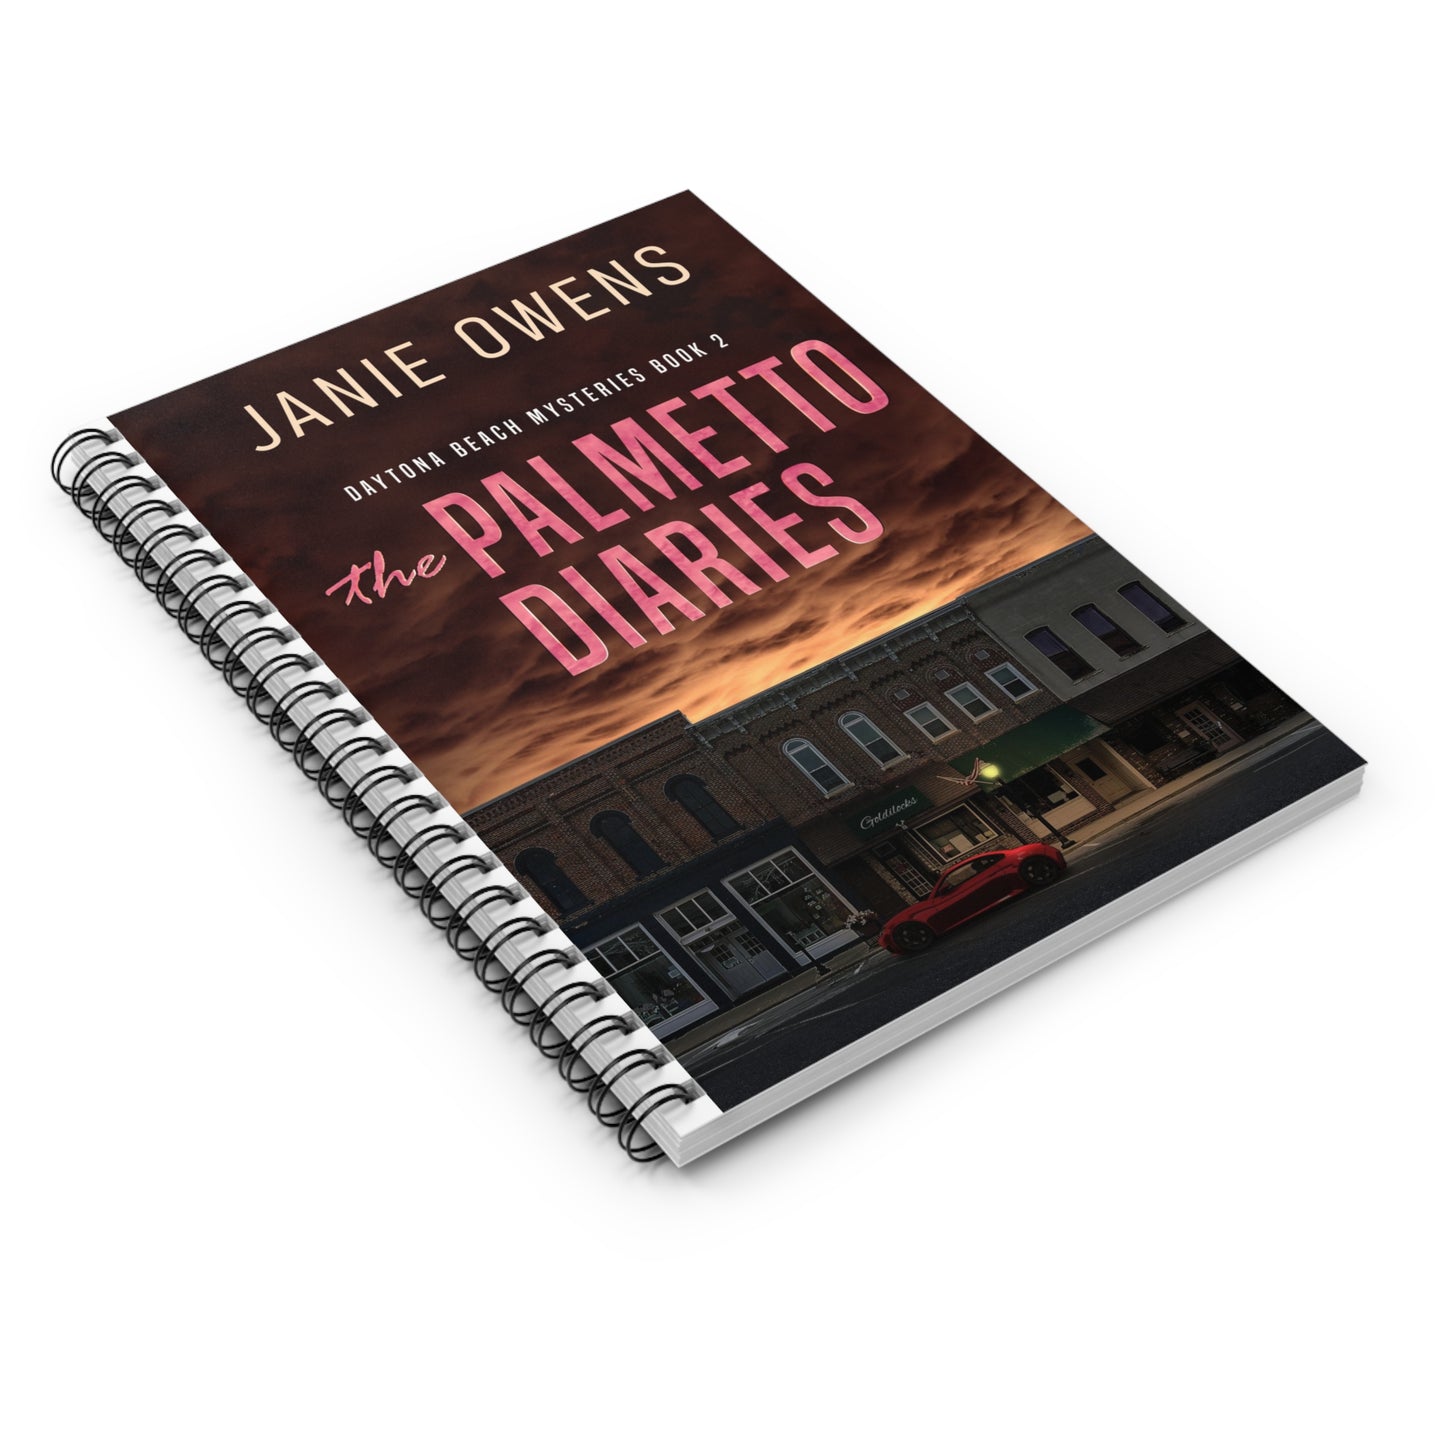 The Palmetto Diaries - Spiral Notebook